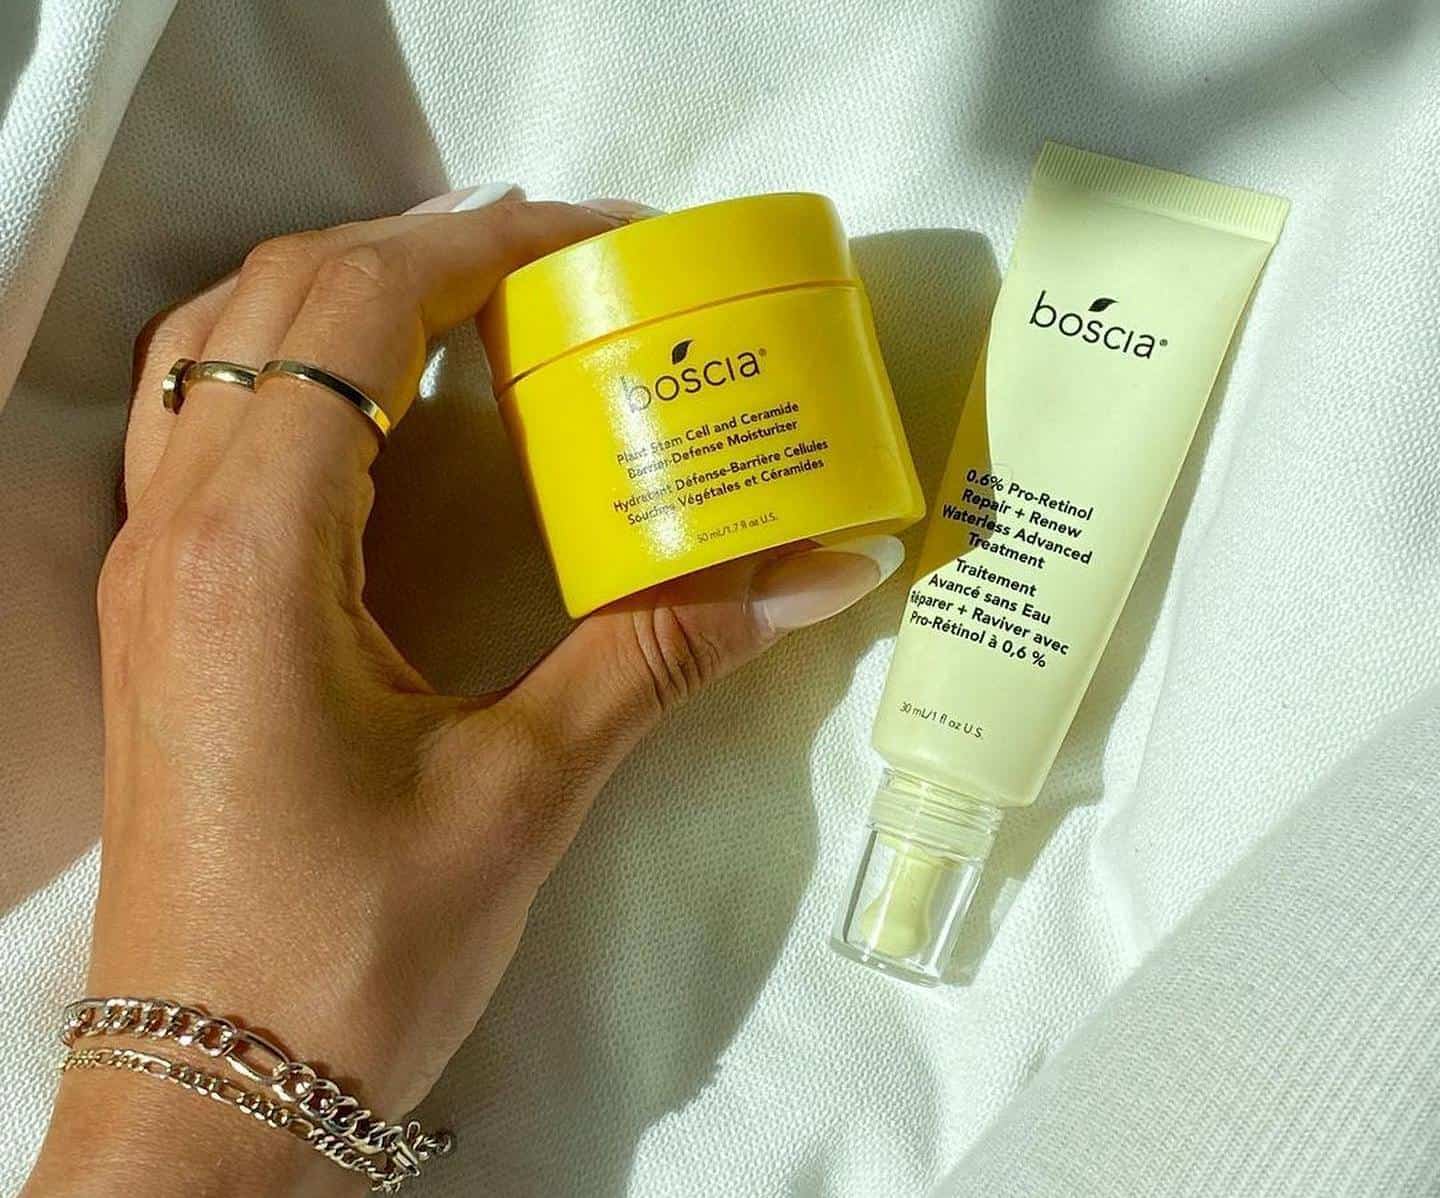 Boscia: From Japan to Canada, Lan Belinky is Sharing Gentle Botanical Skincare for All